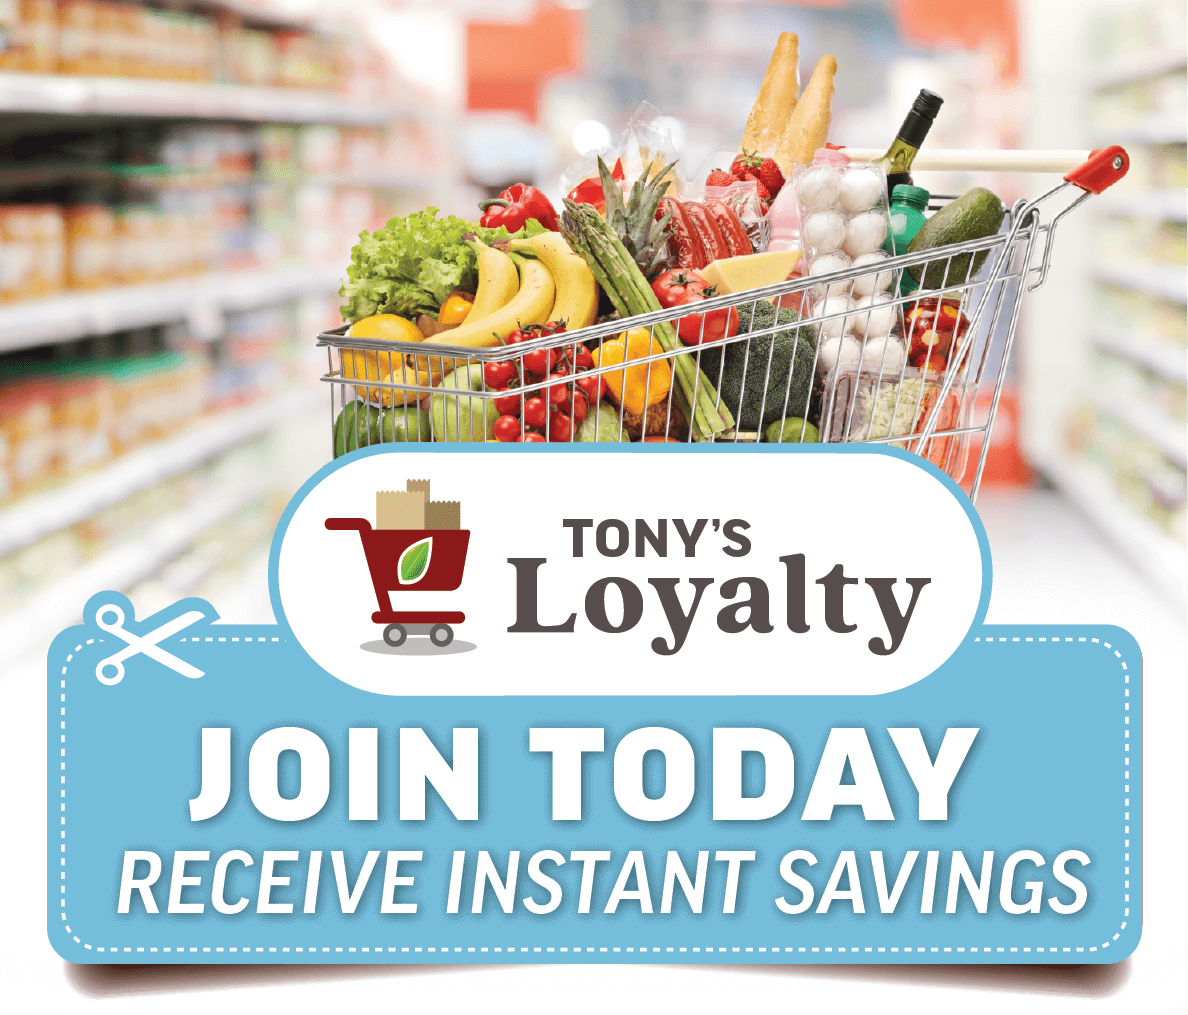 Tonys Loyalty Join today and receive instant savings